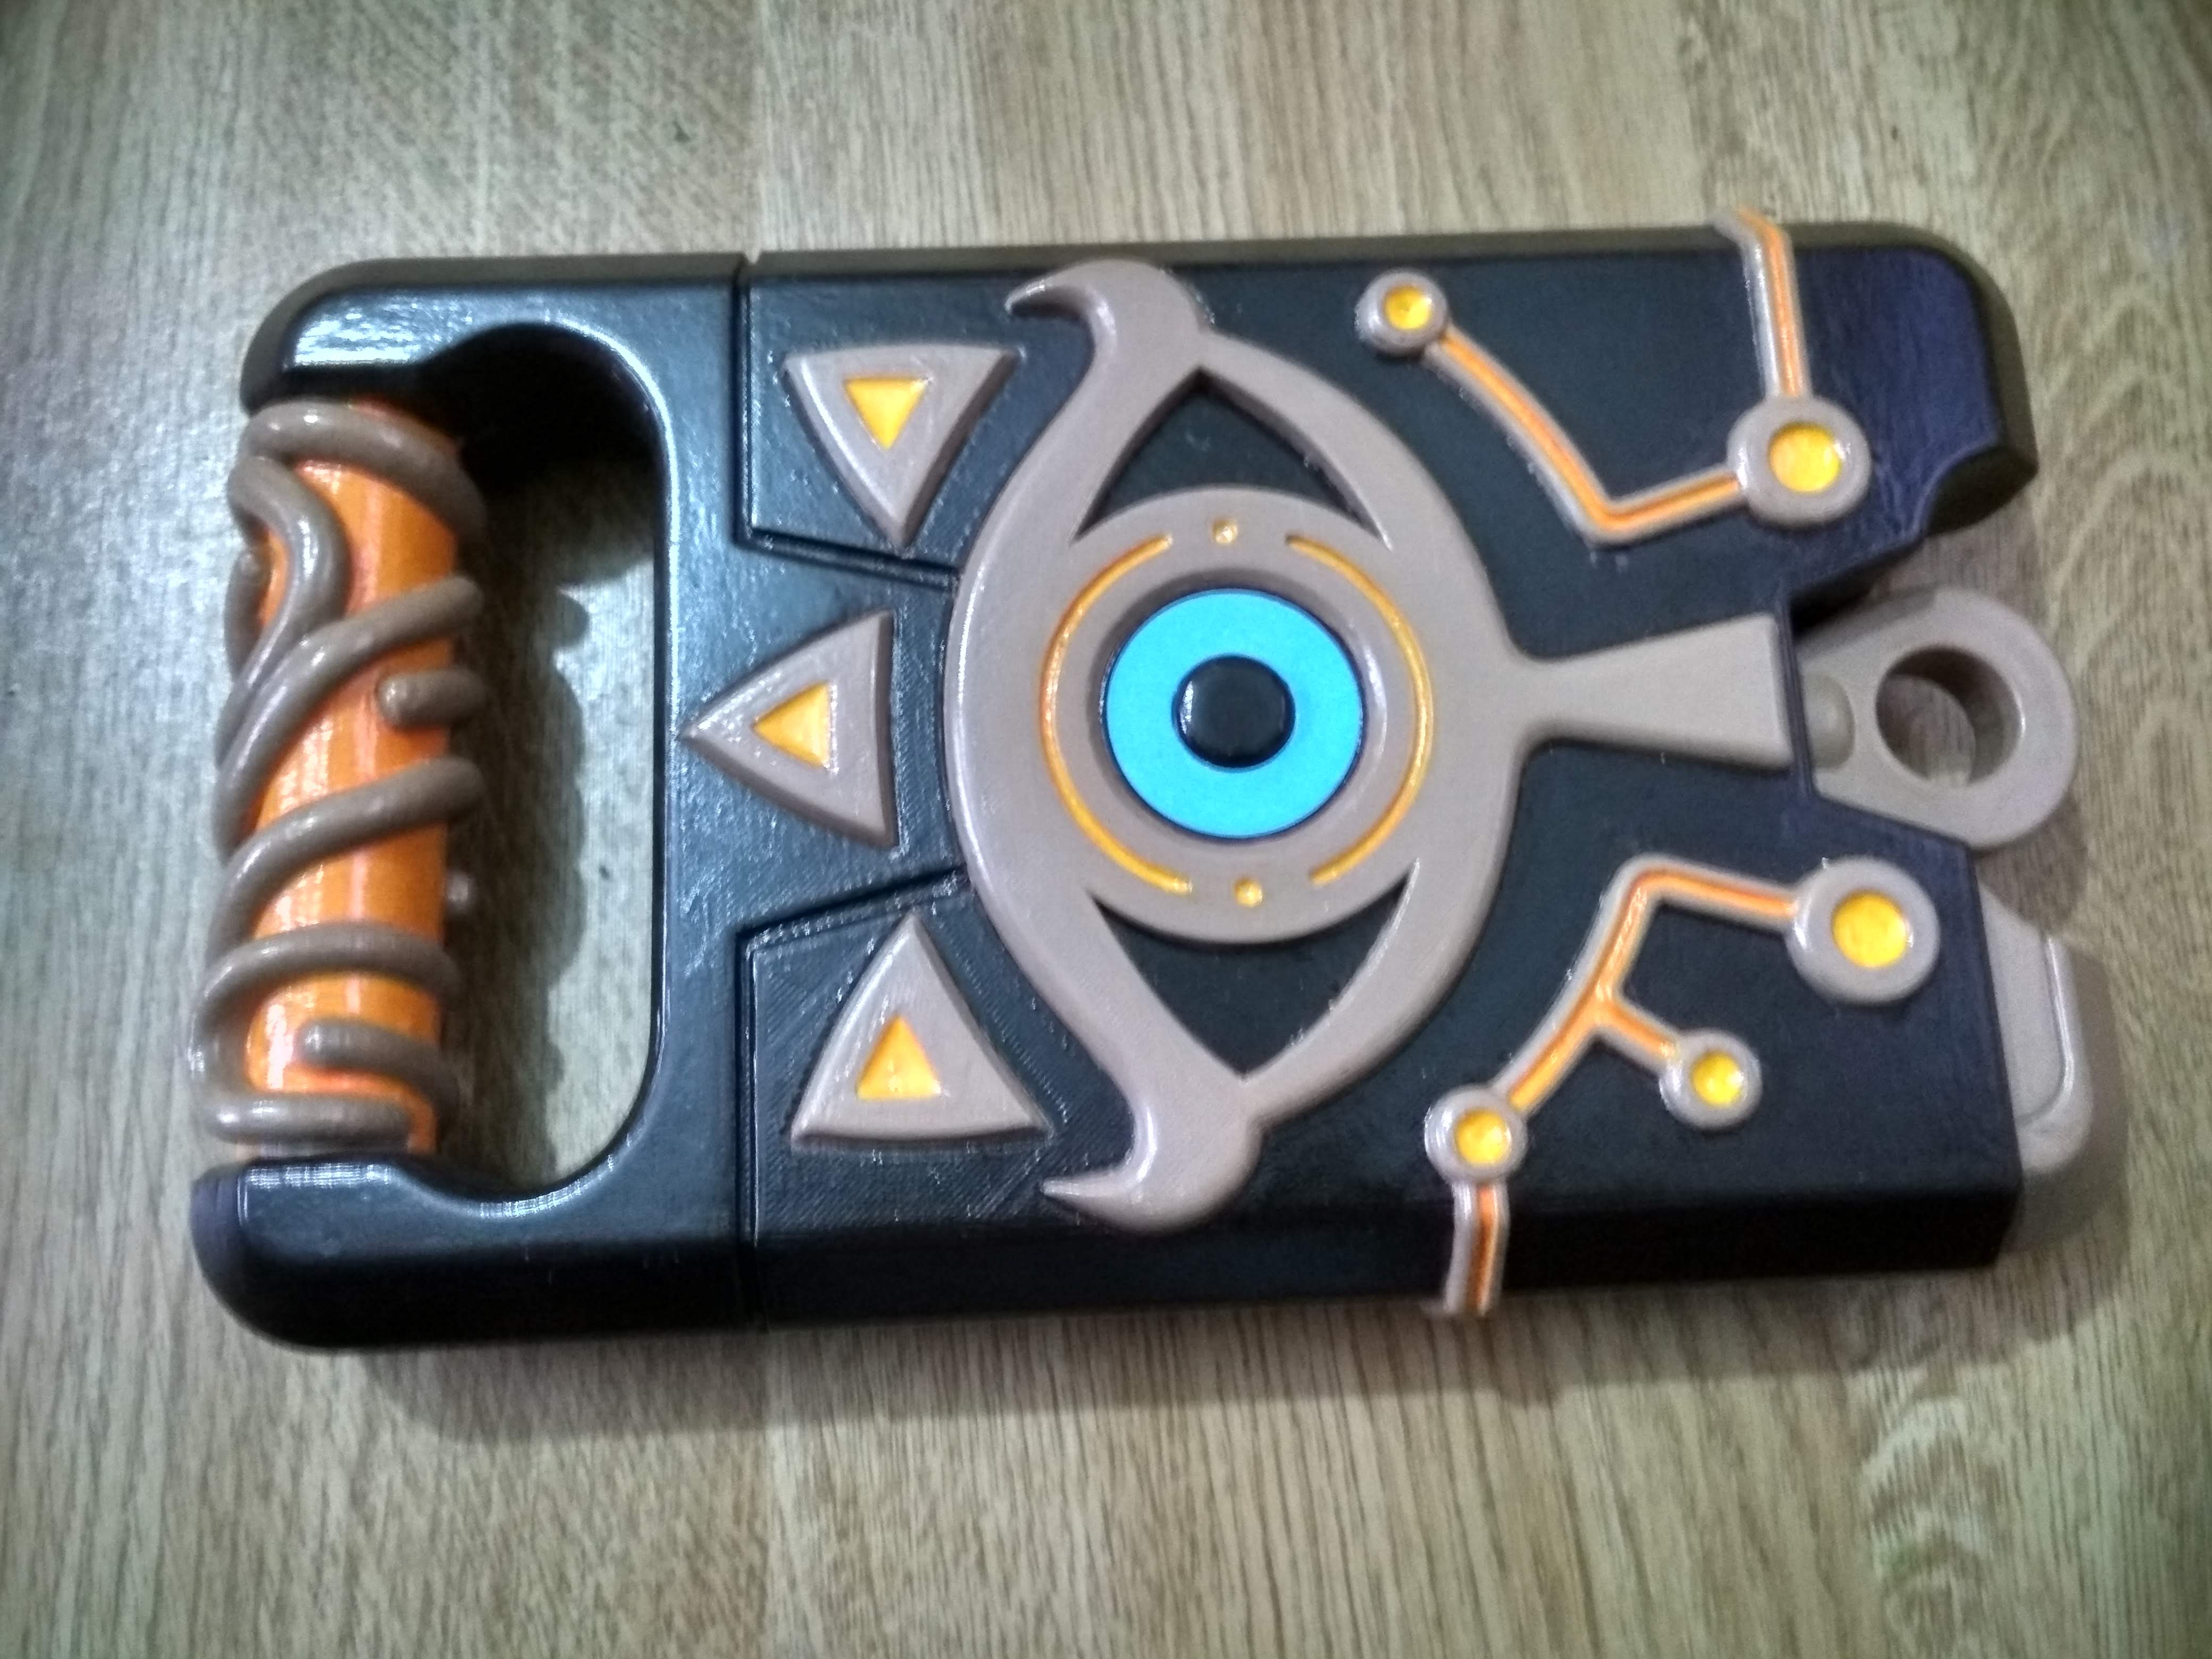 The Sheikah slate from Zelda Breath of the wild